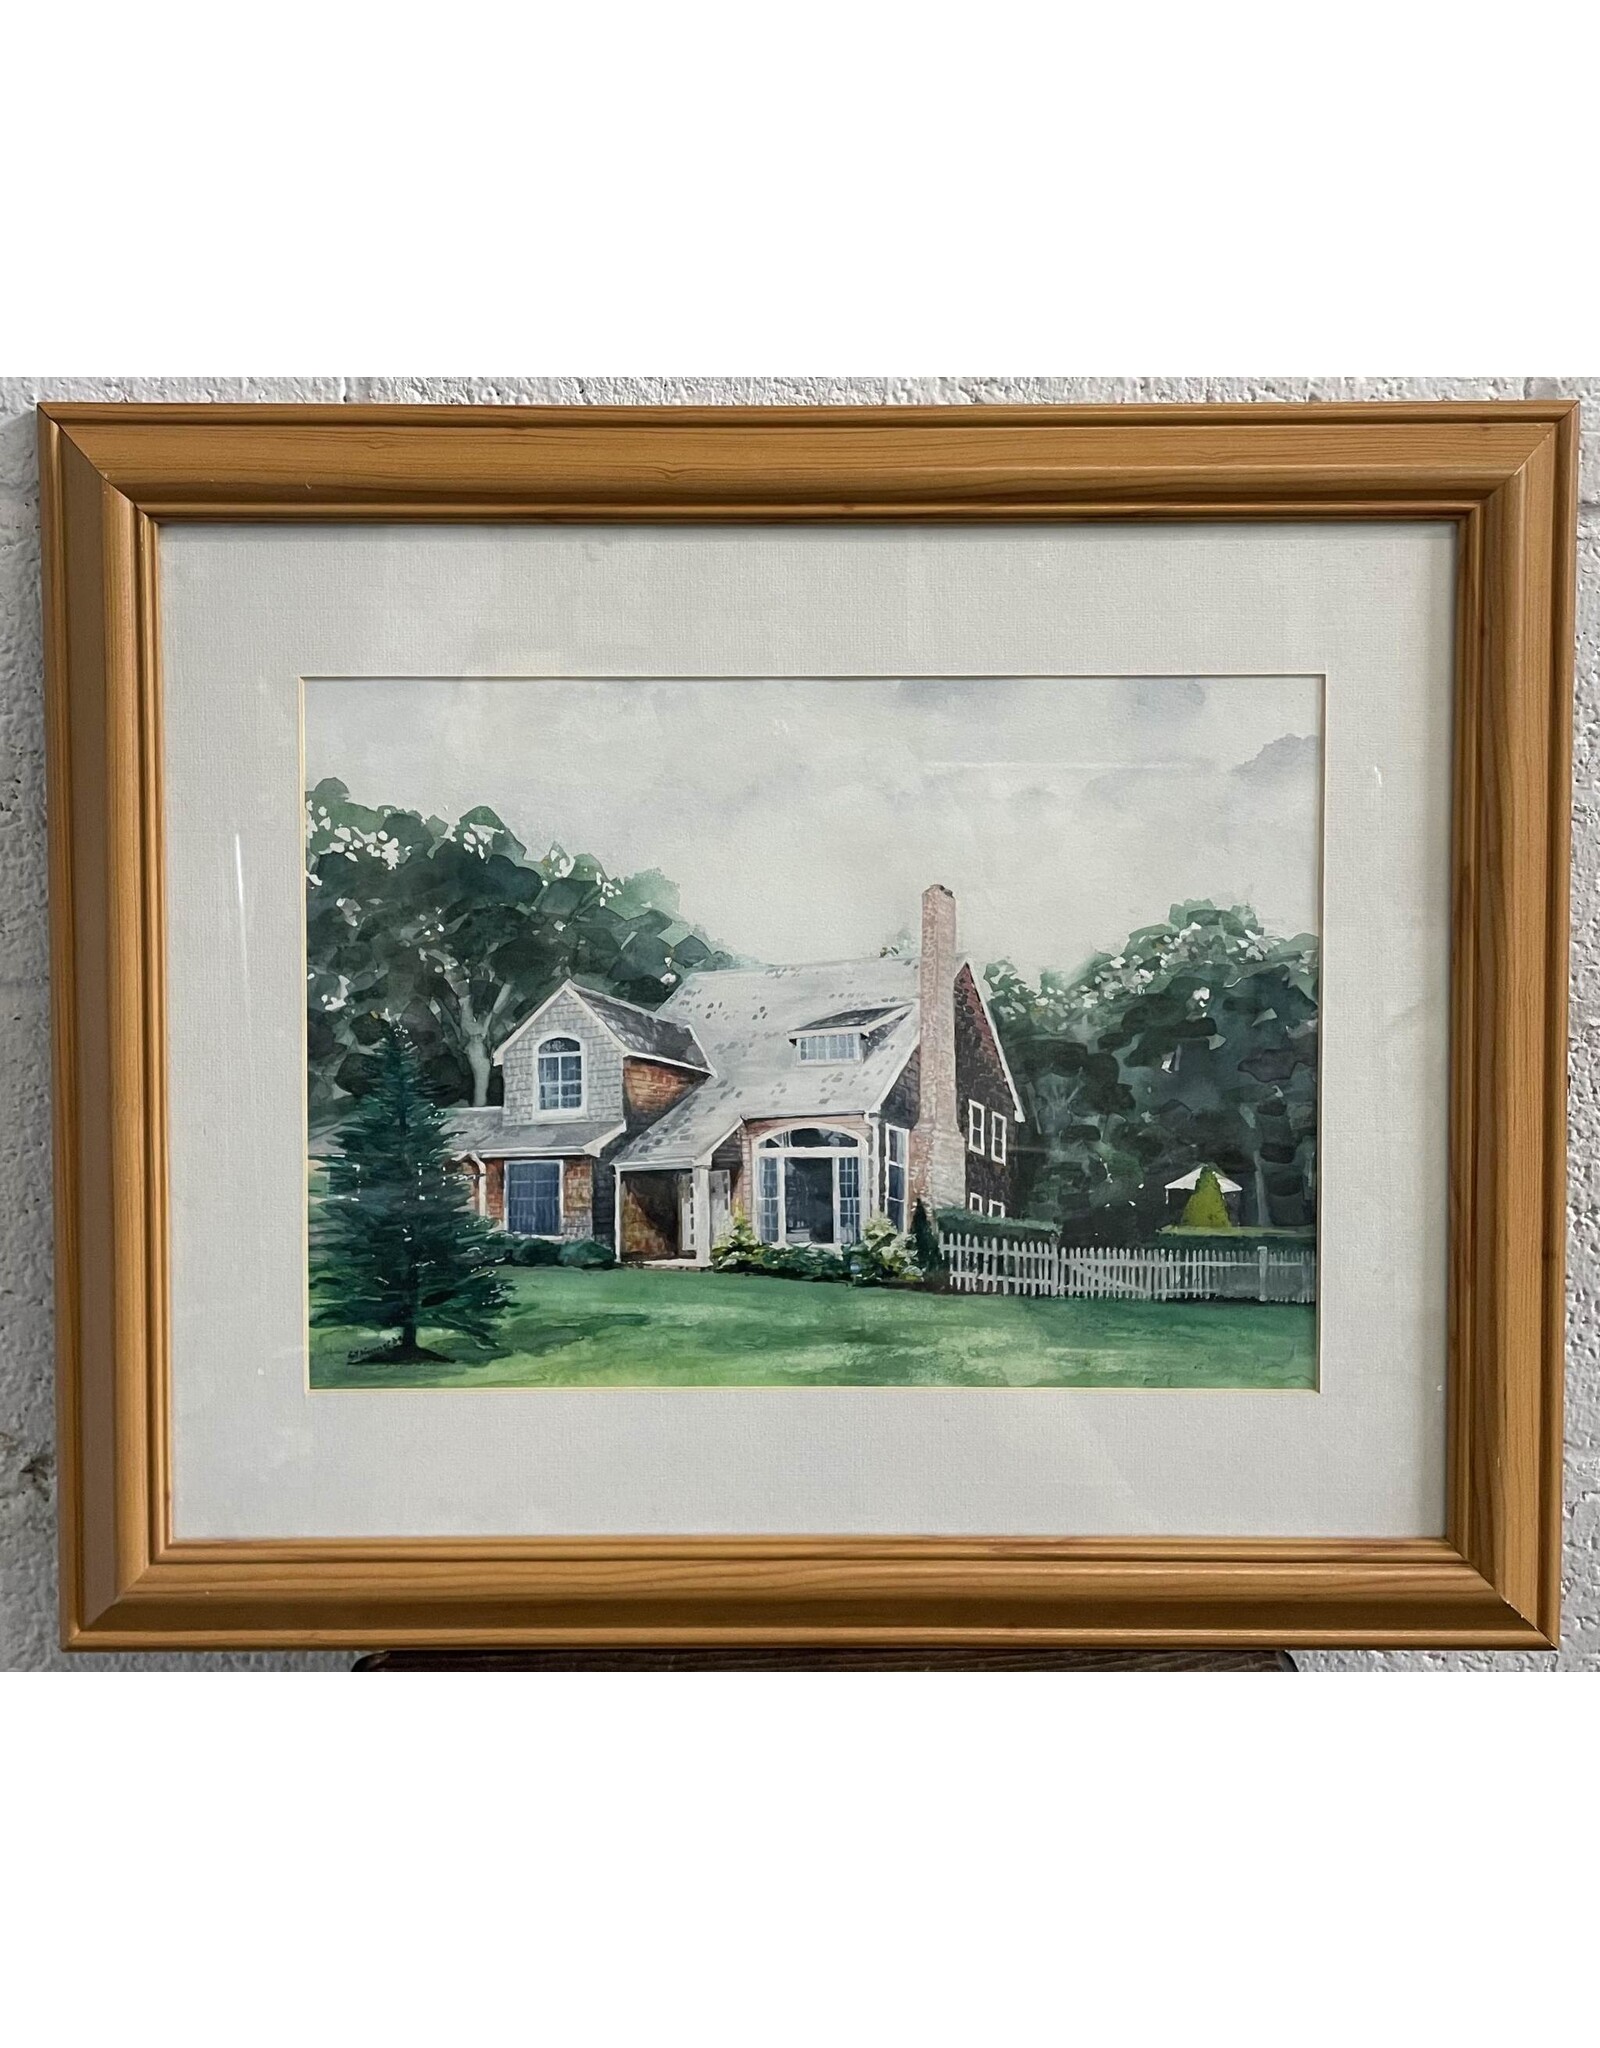 Home Watercolor by Gil Vannet